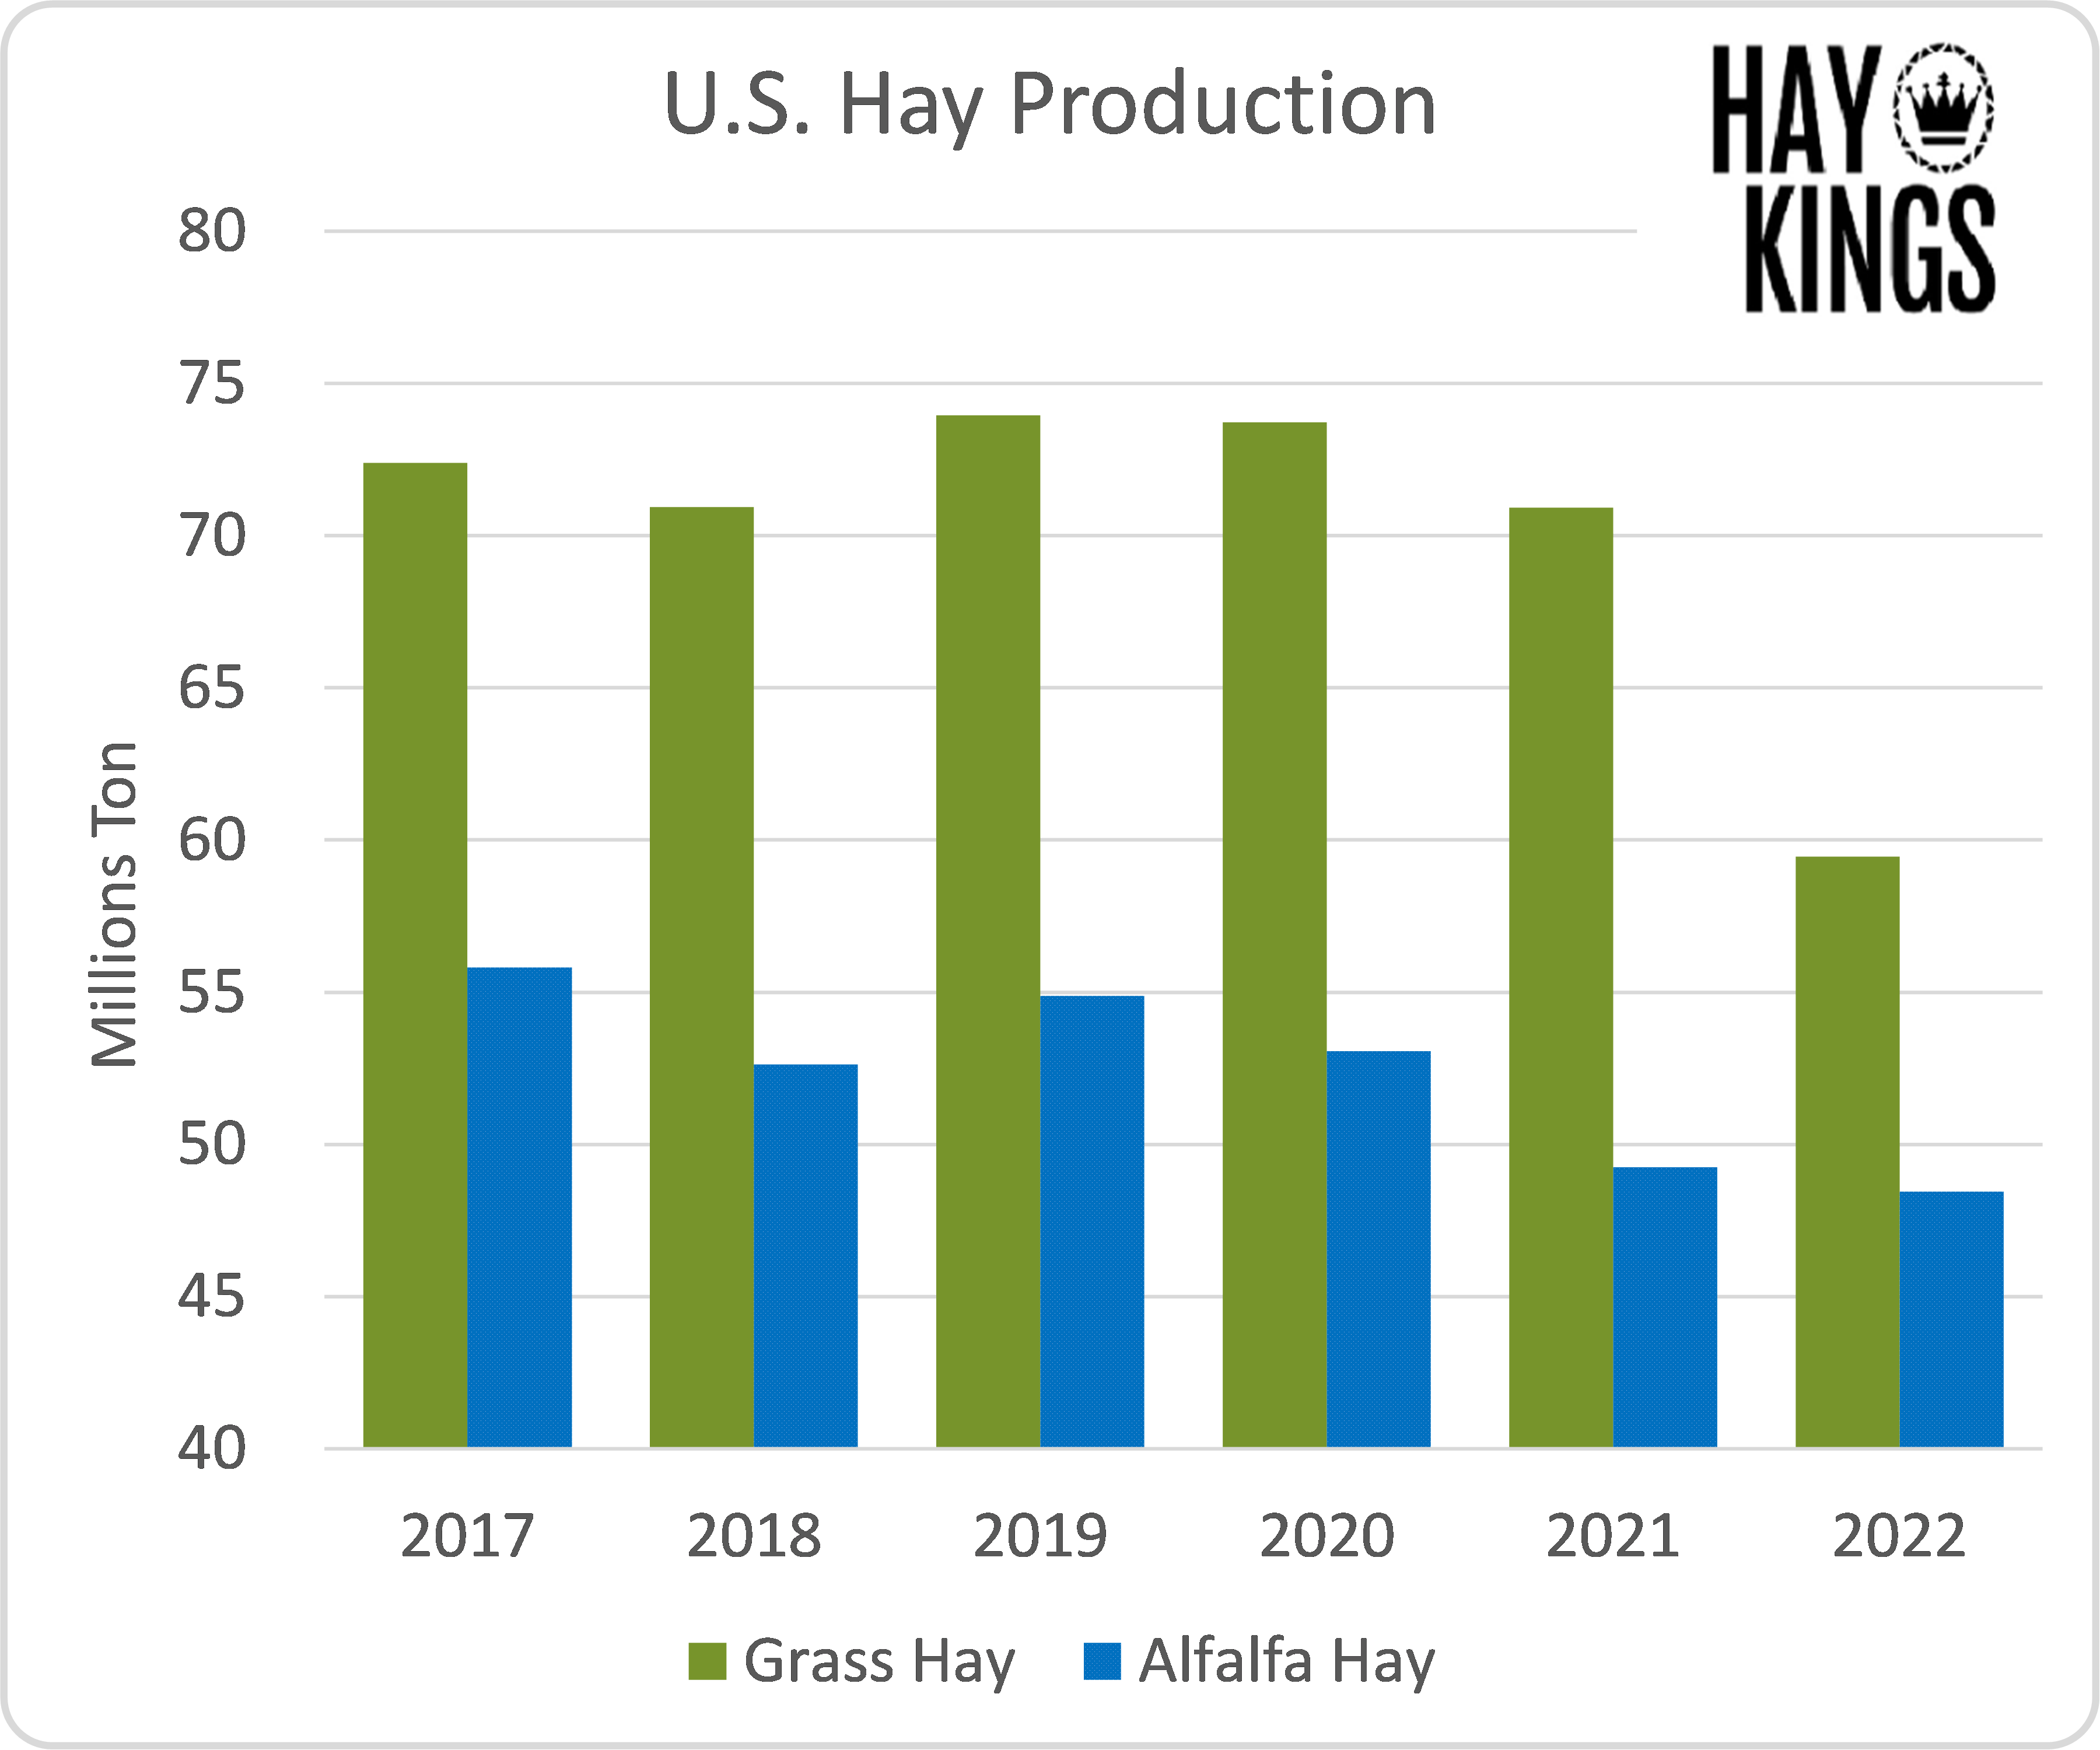 U.S. Hay Production Lower in 2022